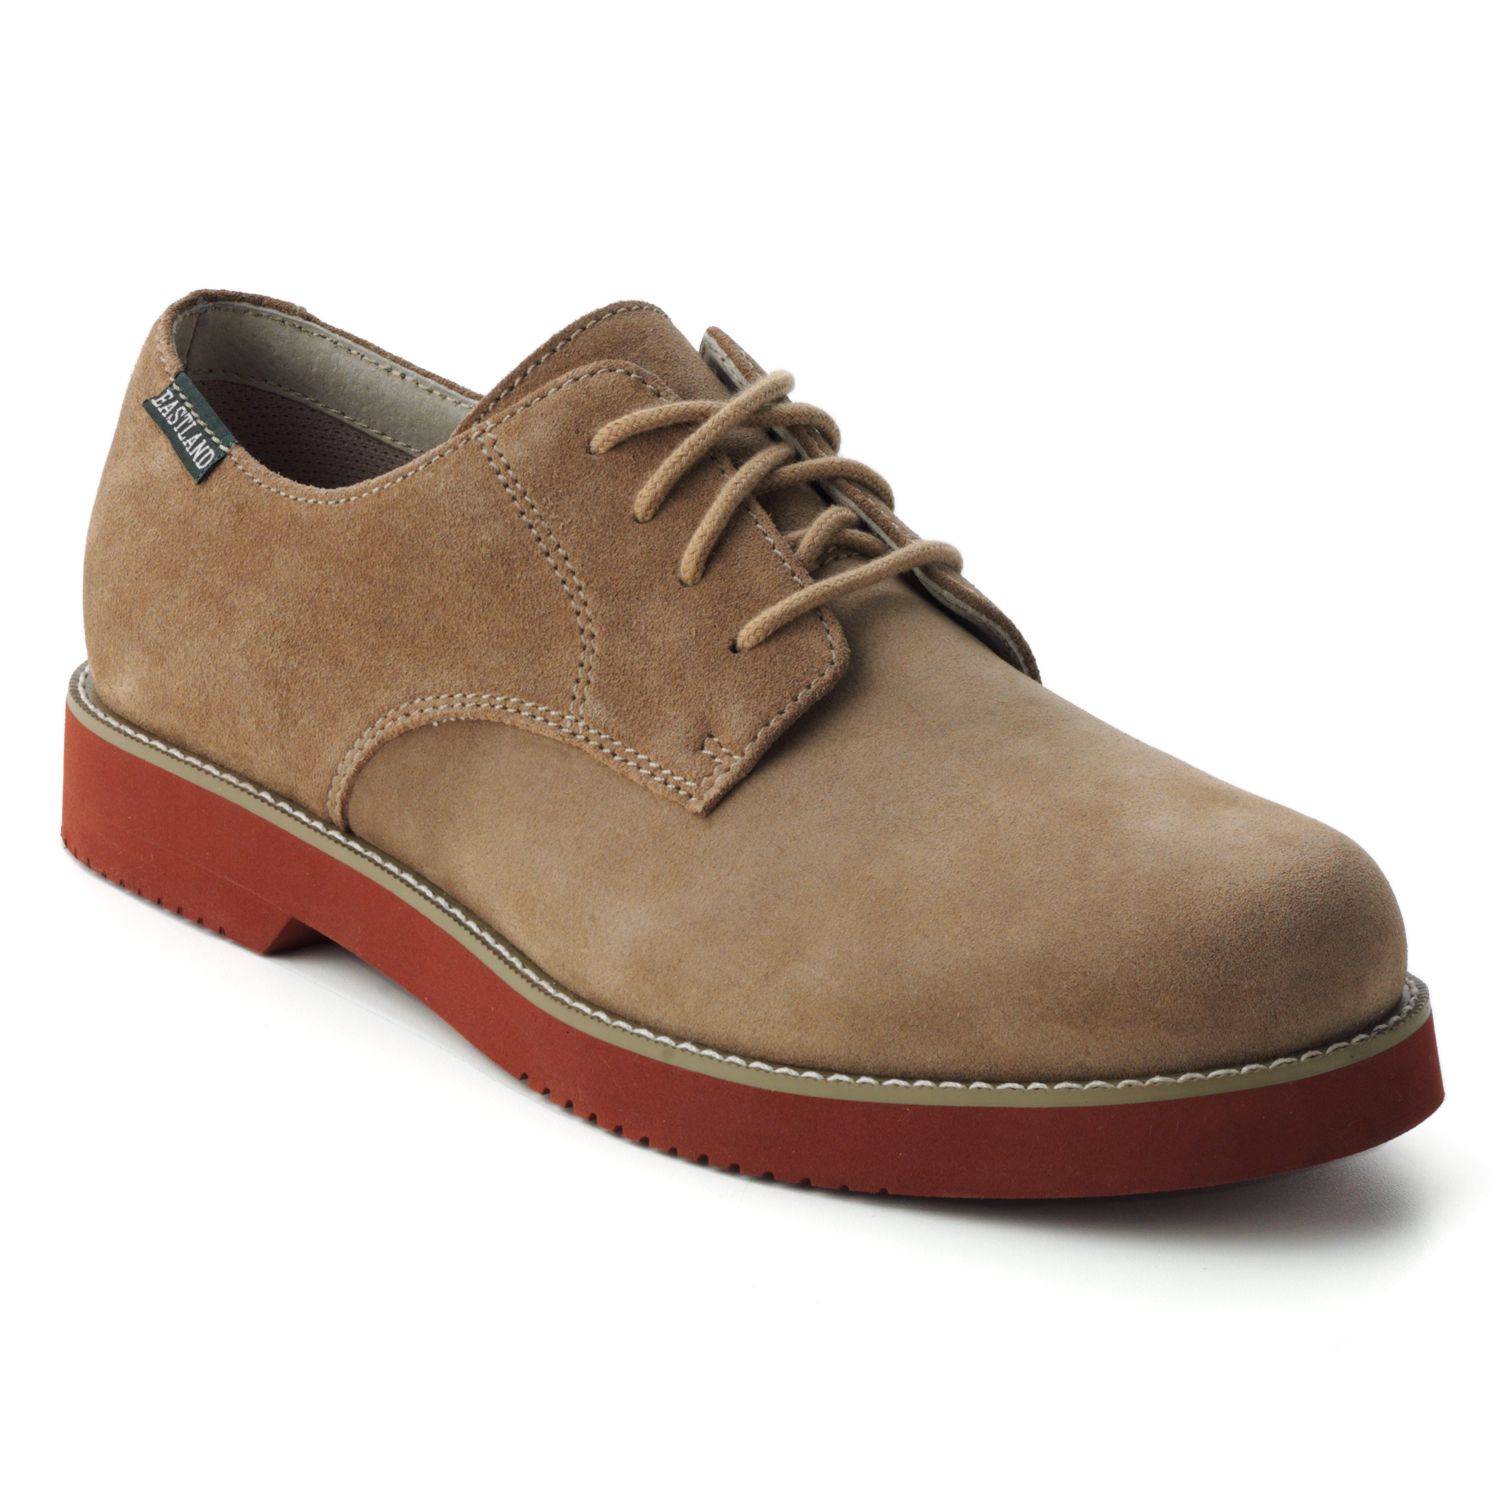 buck suede shoes